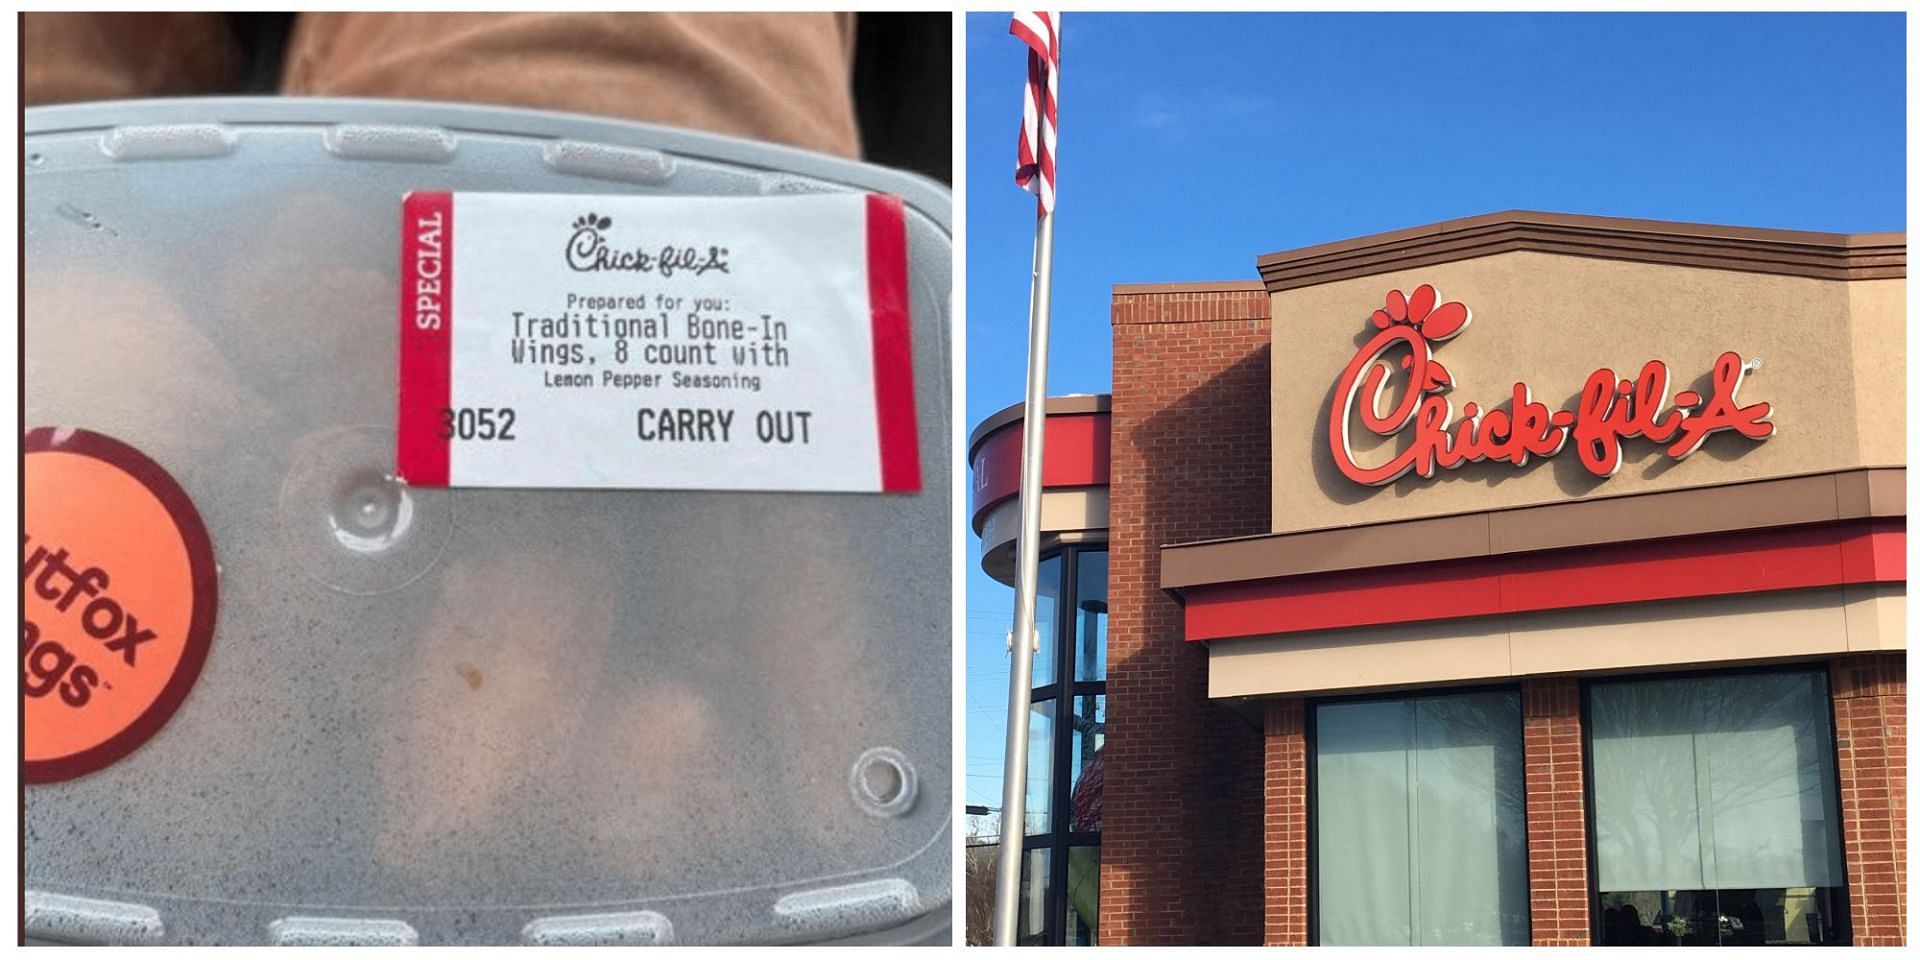 Is Chick-fil-A testing or selling Chicken Wings? Truth Debunked (Image via Chick Fil A)